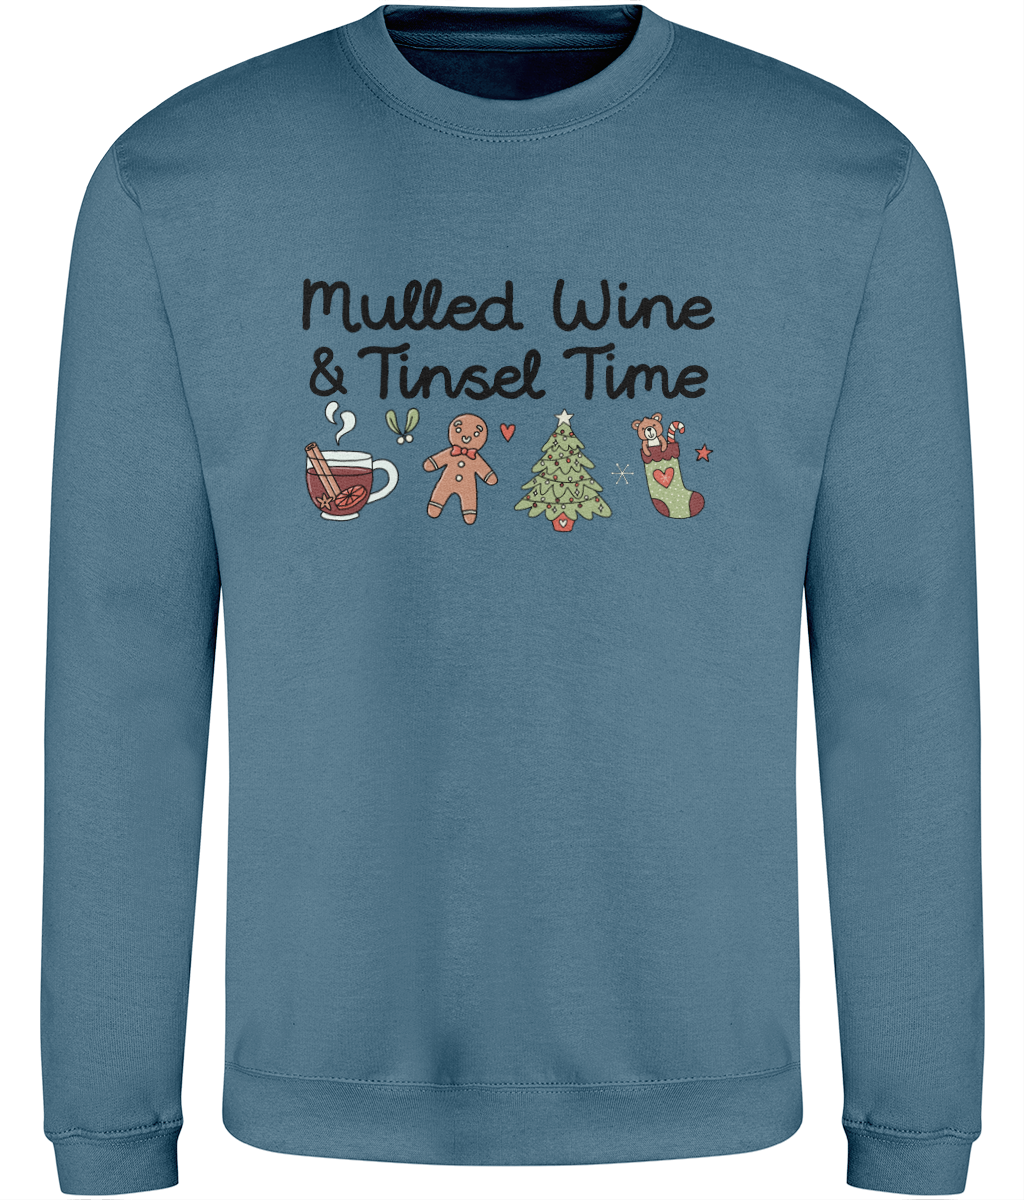 Mulled Wine & Tinsel Time - Adult Sweatshirt - Multi Colour Available